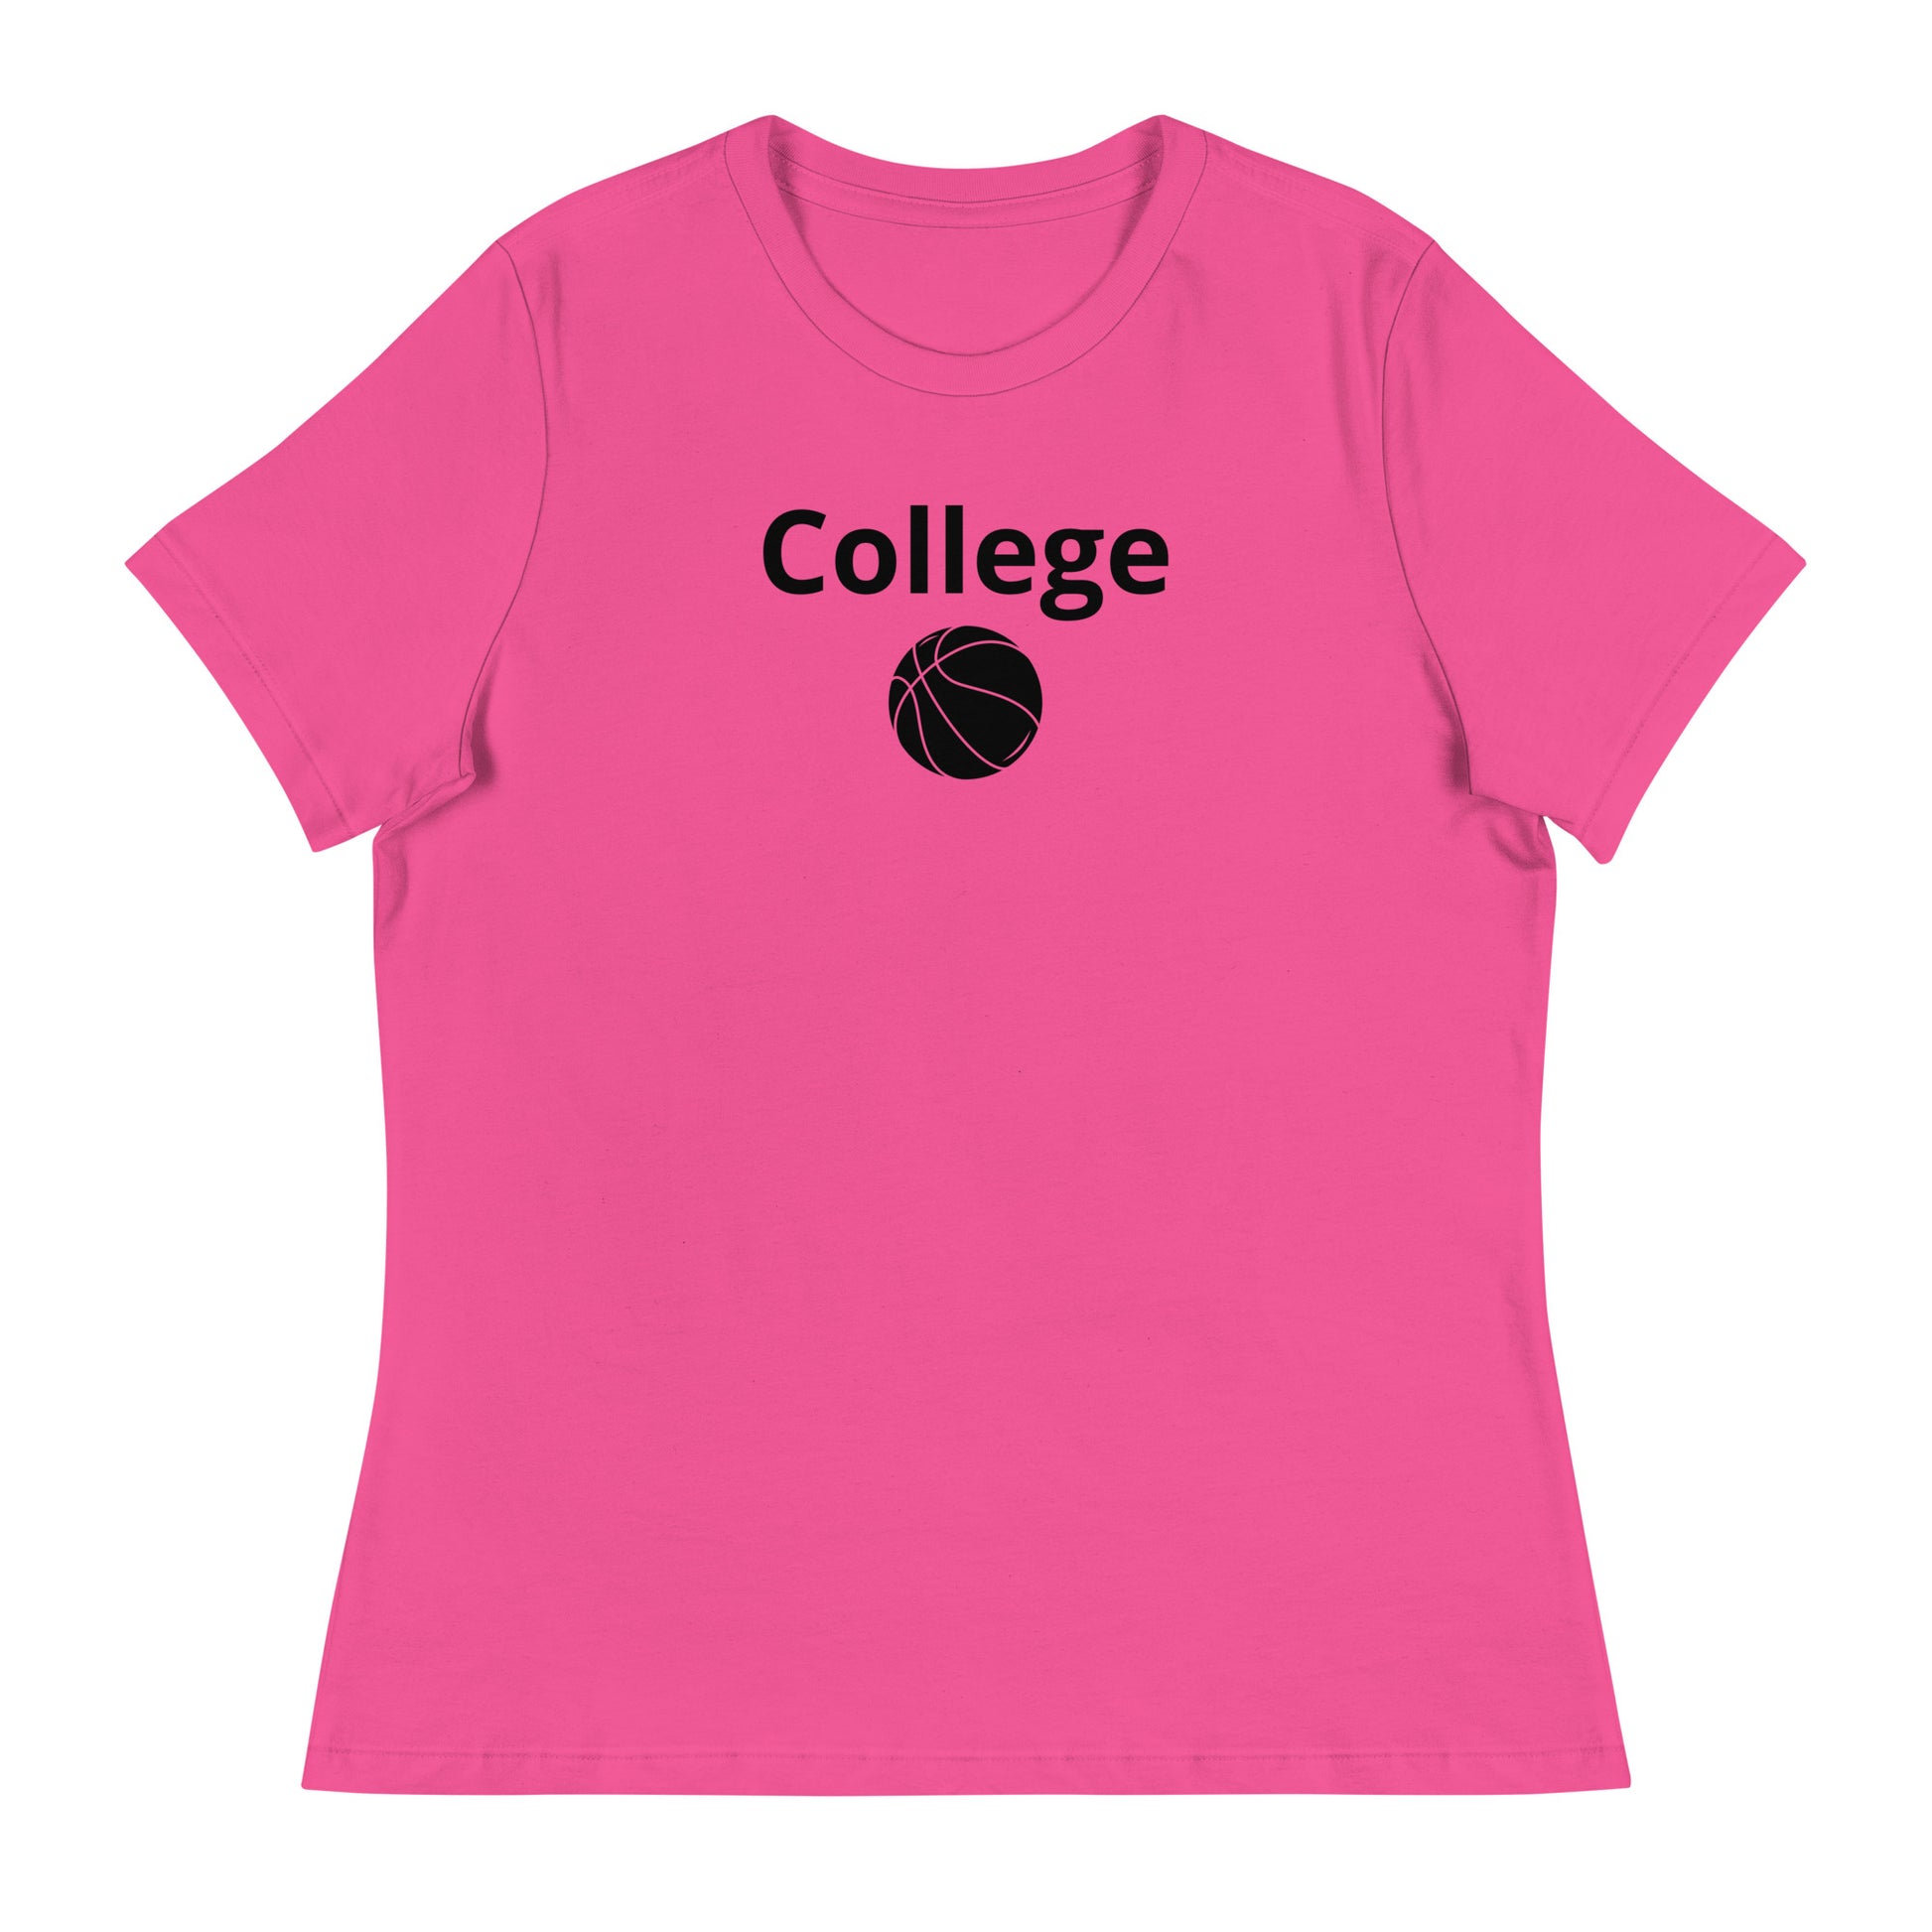 Women's college basketball graphic tee shirt in berry